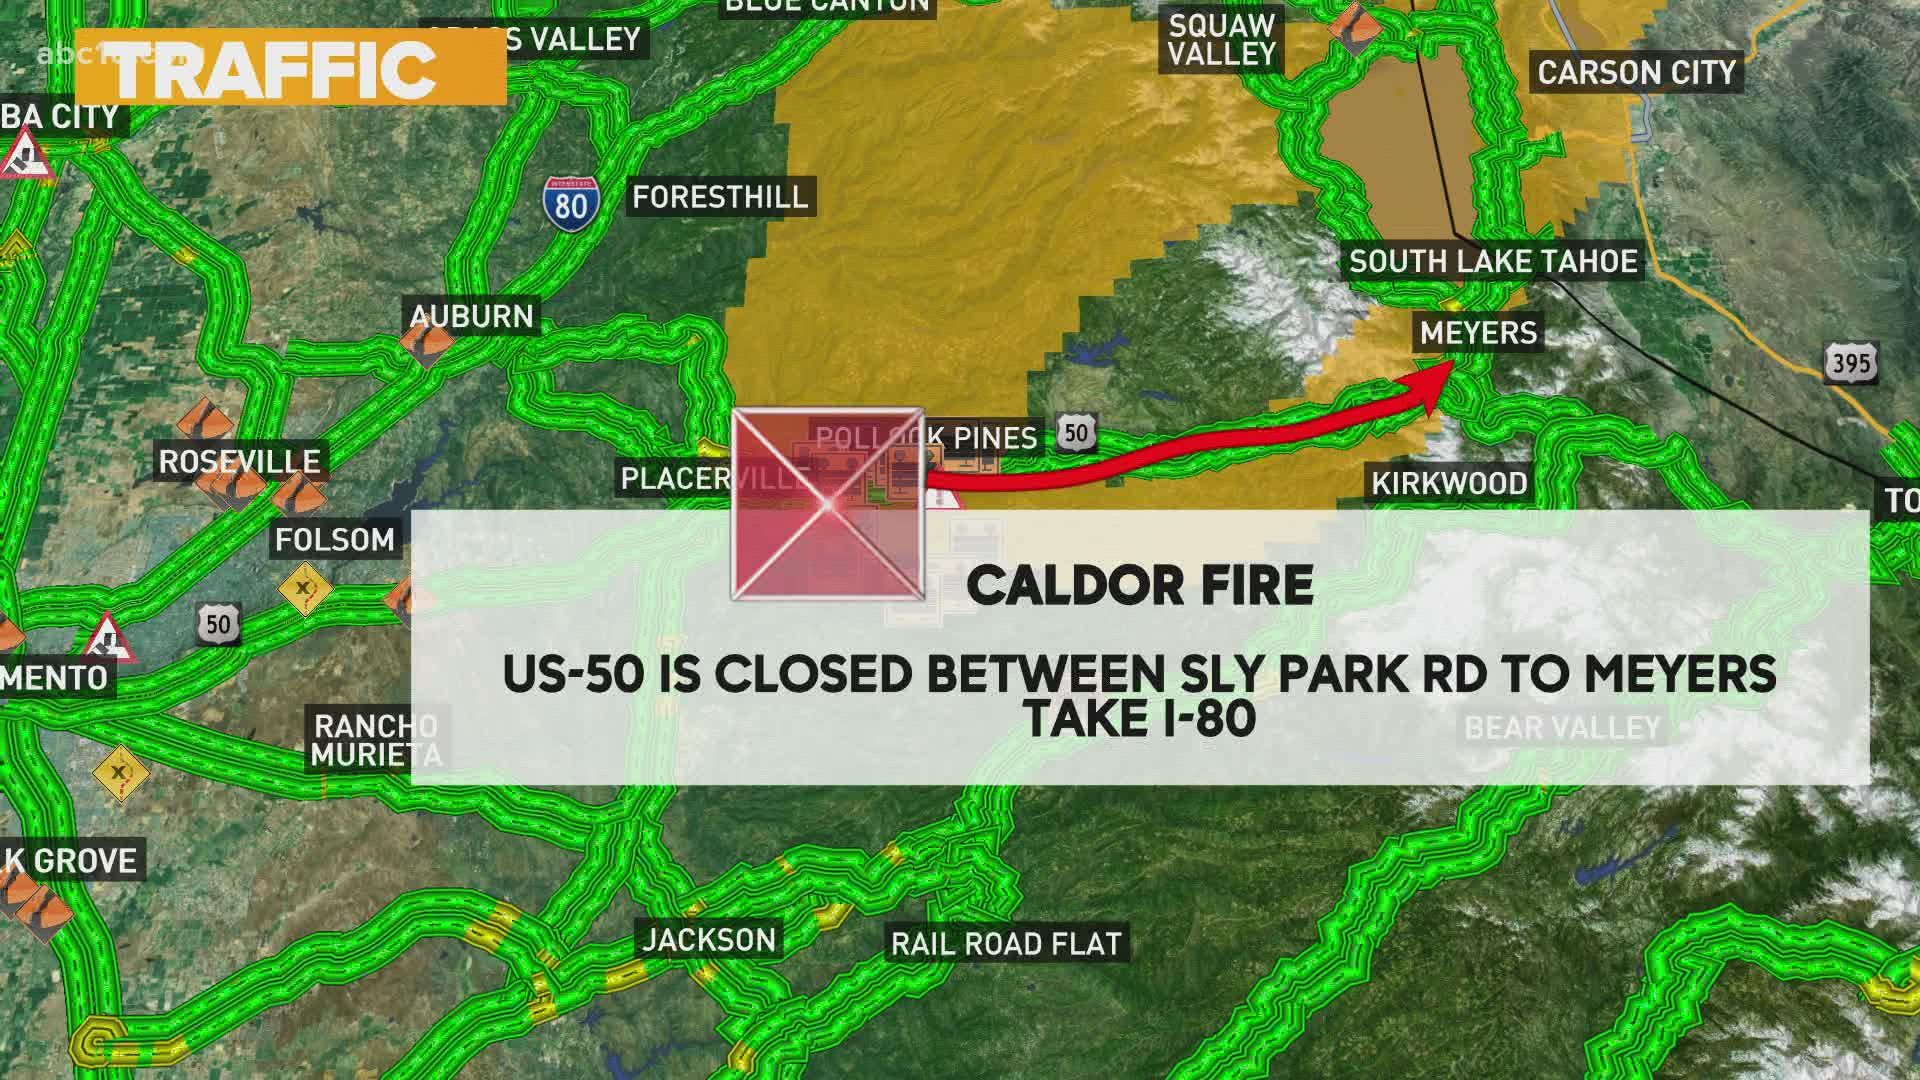 Hwy. 50 has been shut down from Sly Park to Myers. When it'll reopen is to be determined.